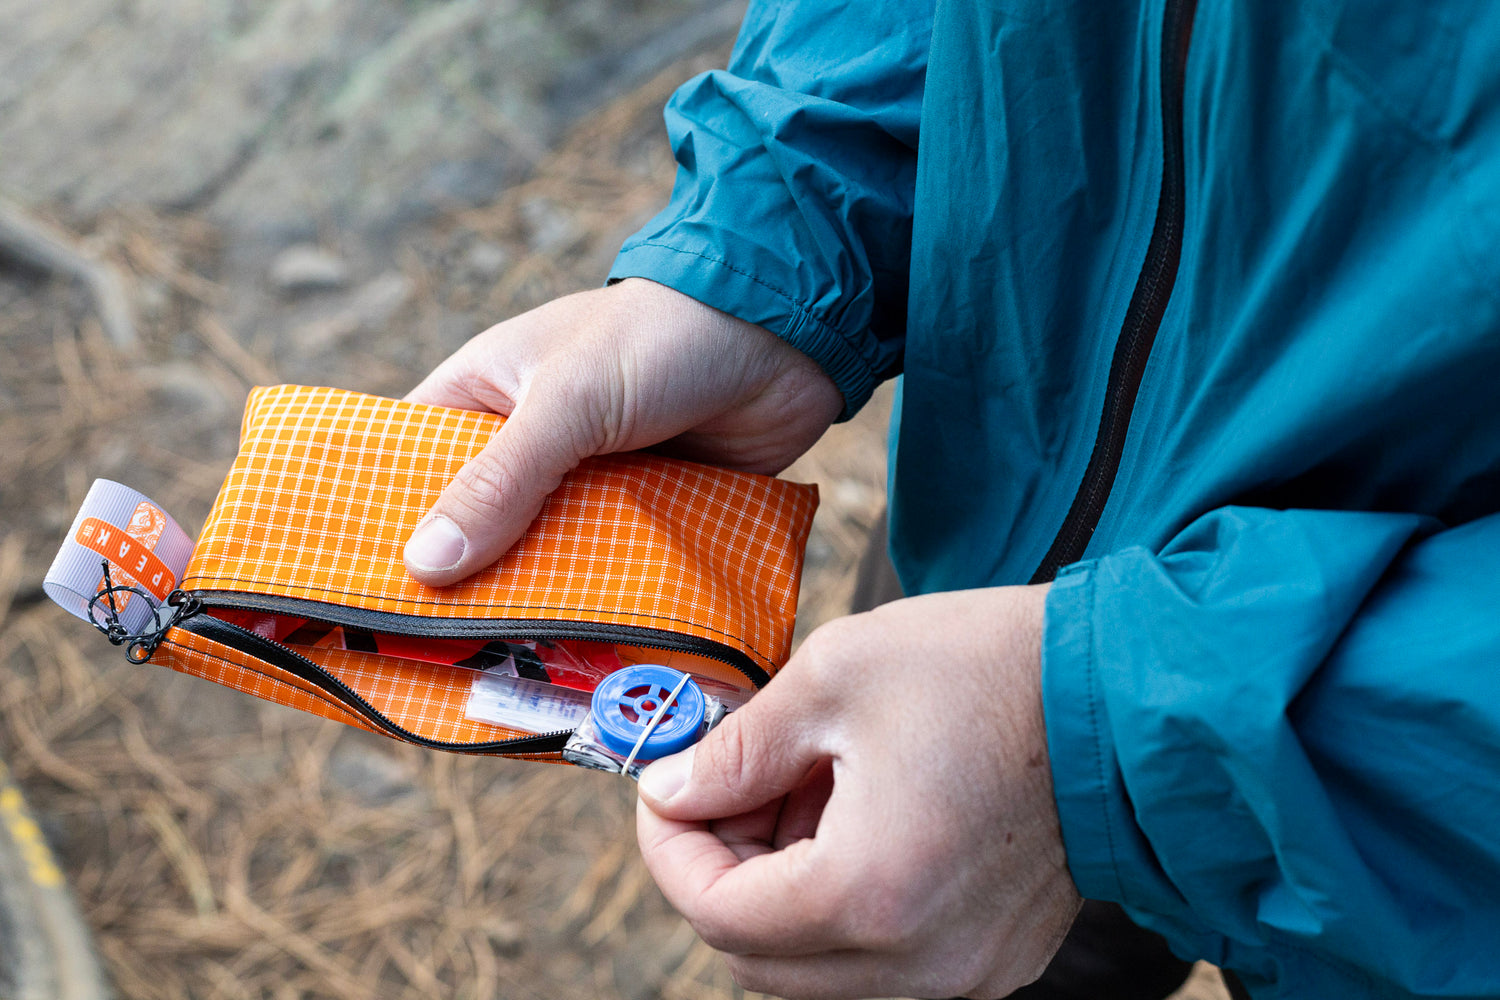 A man pulls a backcountry cpr mask for hiking out of his Peak First Aid Kit.